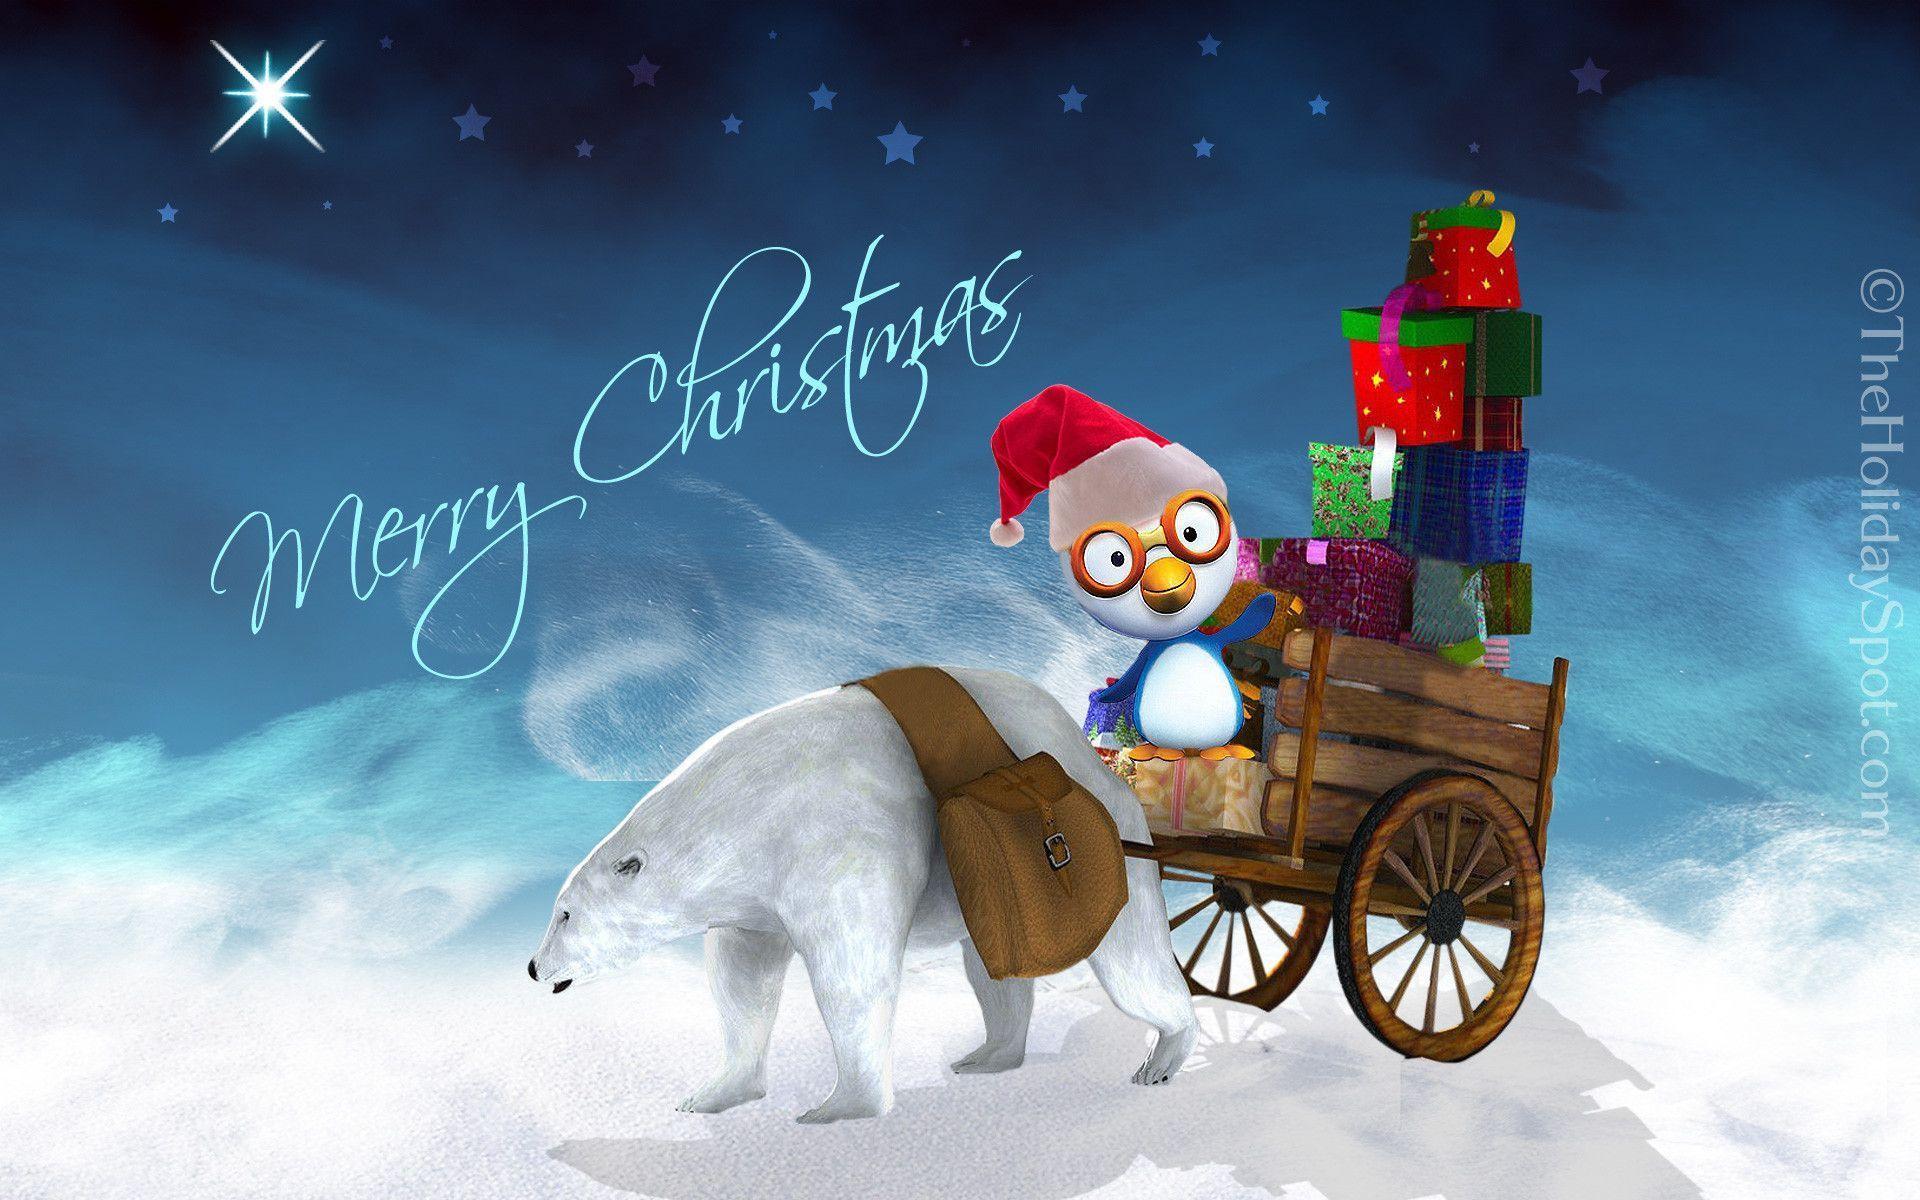 You can also upload and share your favorite Merry Christmas wallpaper image...